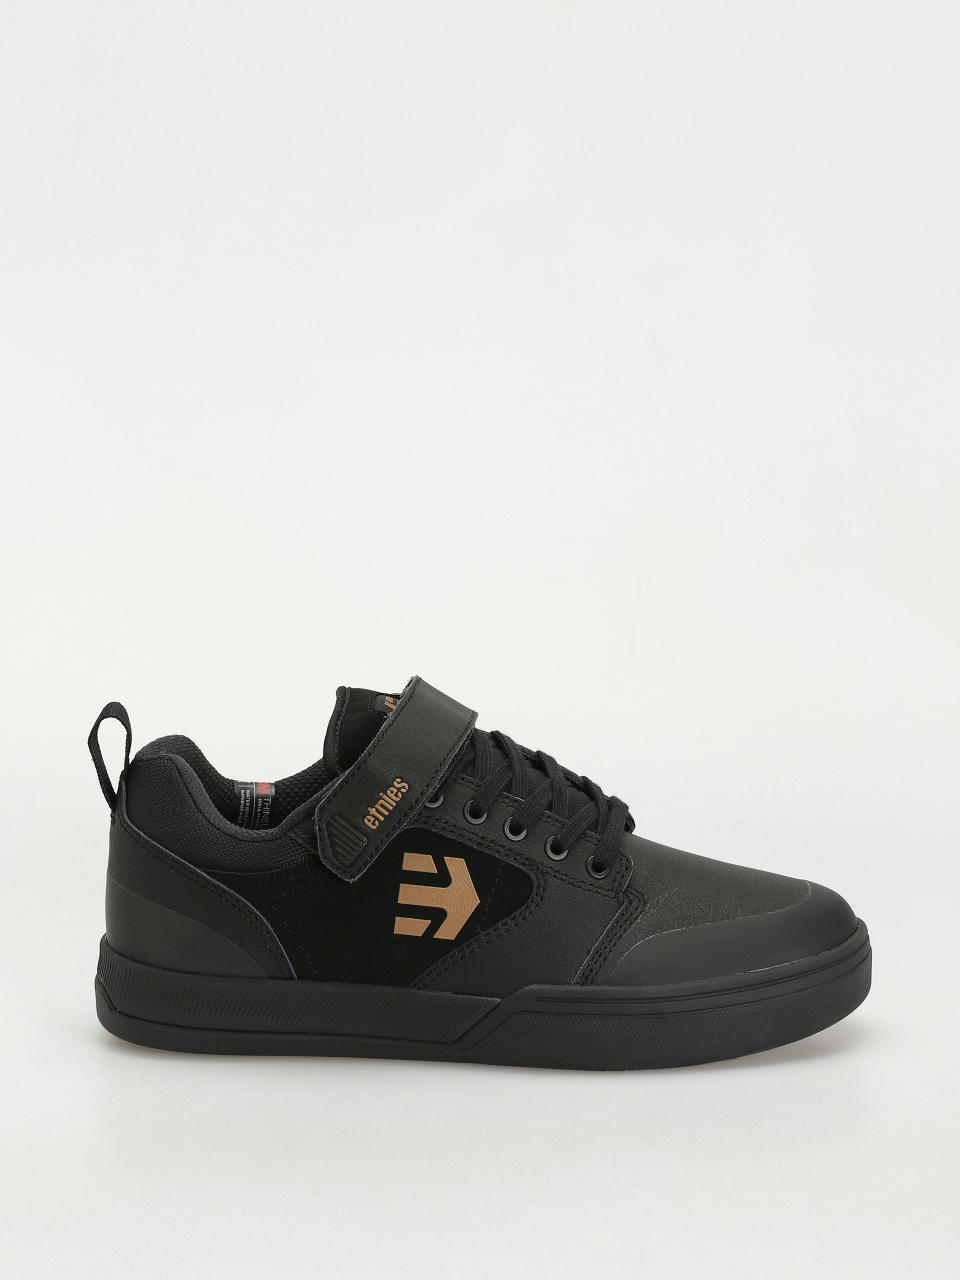 Topánky Etnies Camber Clip (black/gold)